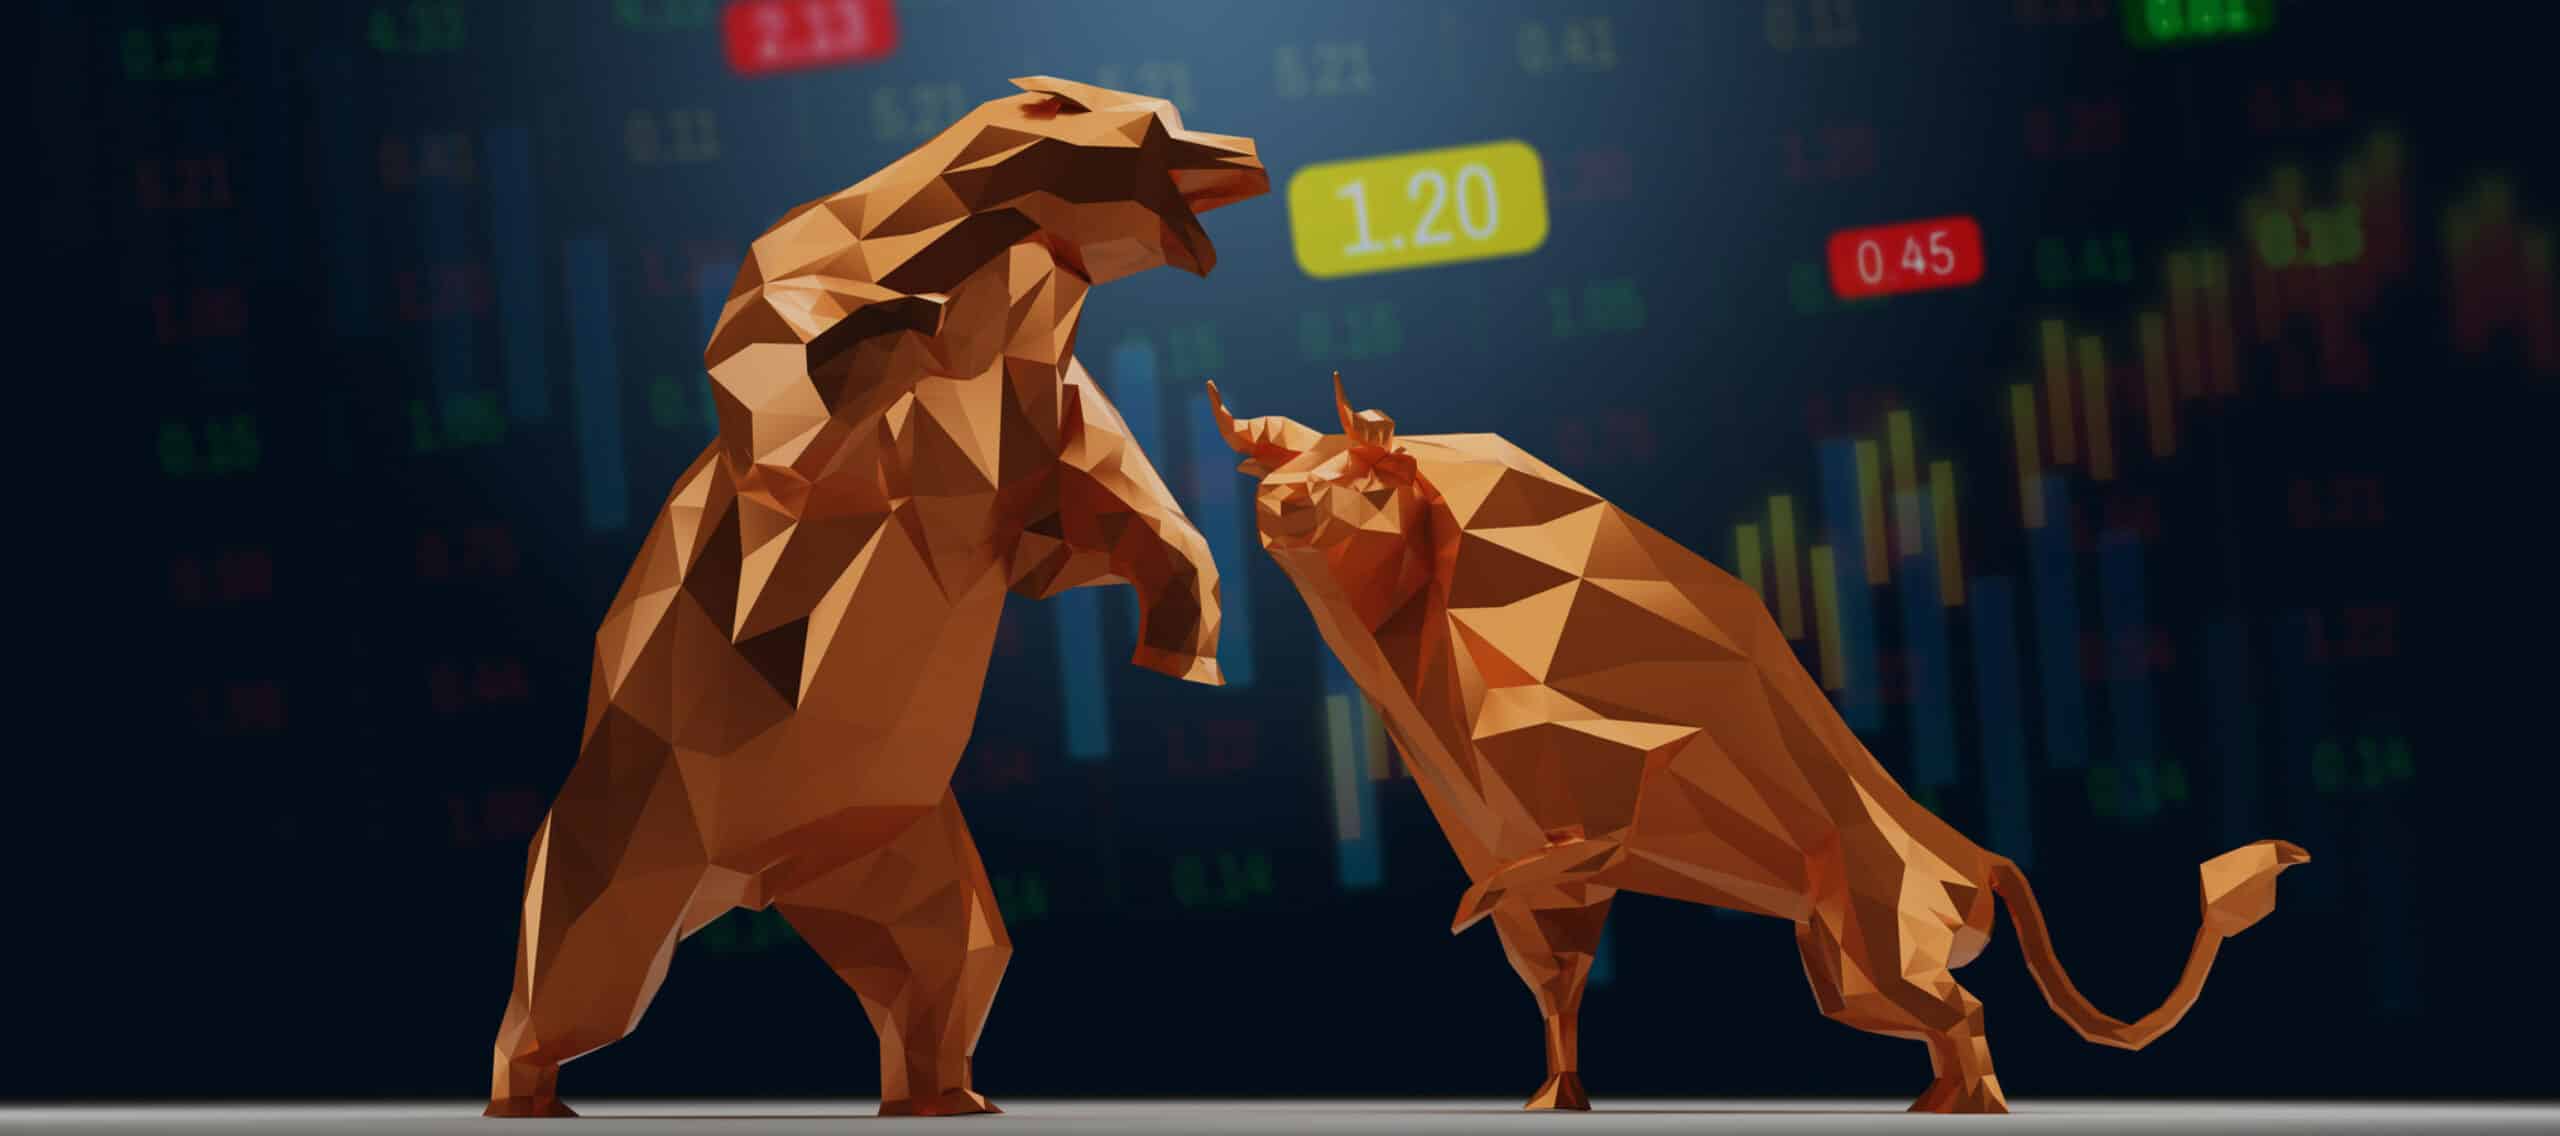 Is This Bull Market Timid or Ready to Charge?